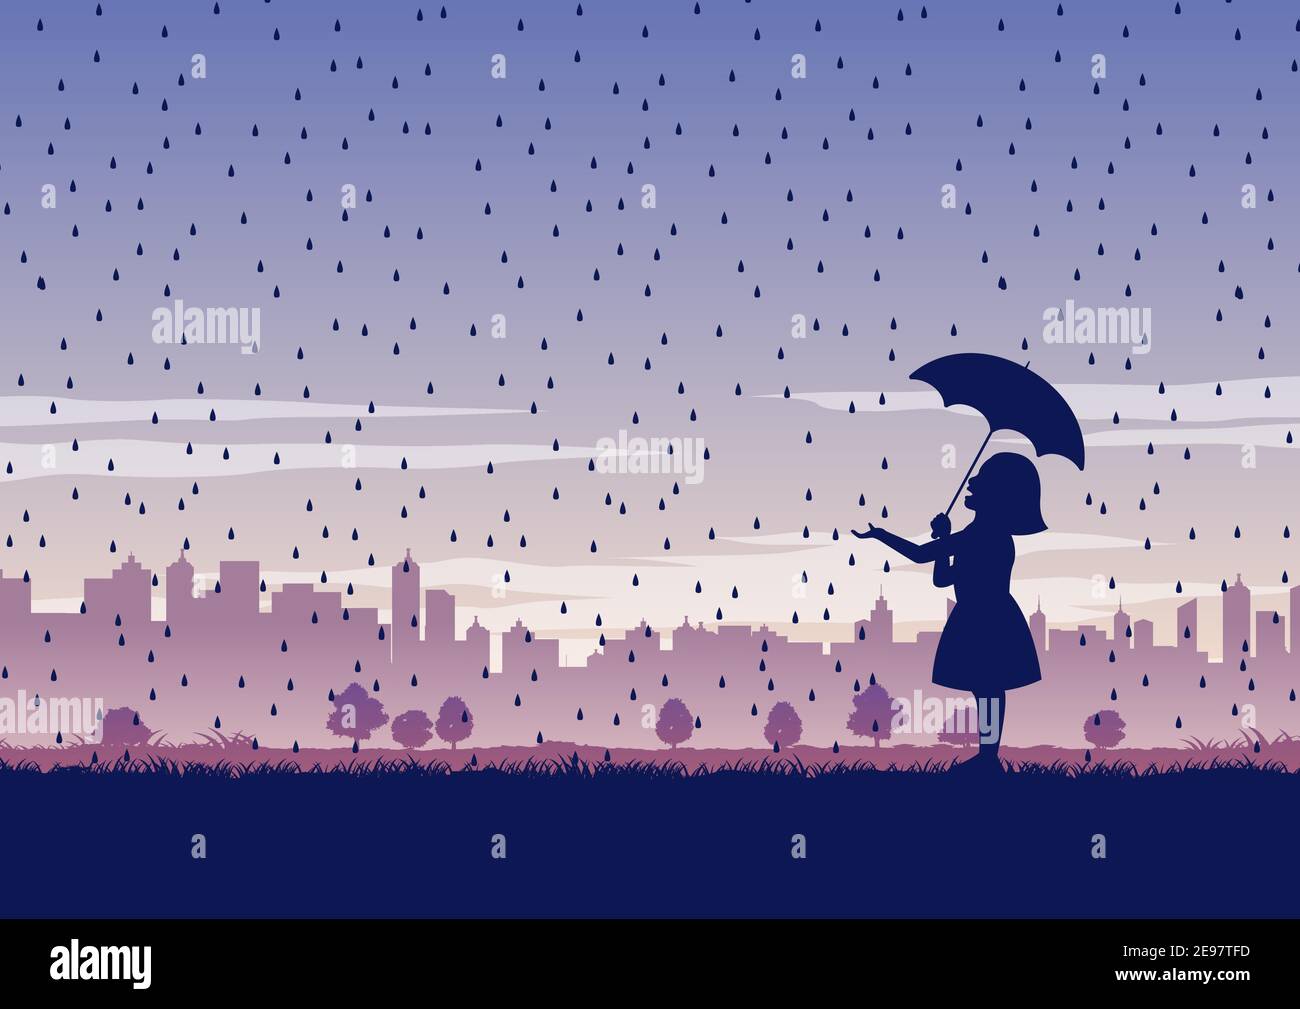 silhouette design of girl and umbrella in the middle of rain,vector illustration Stock Vector